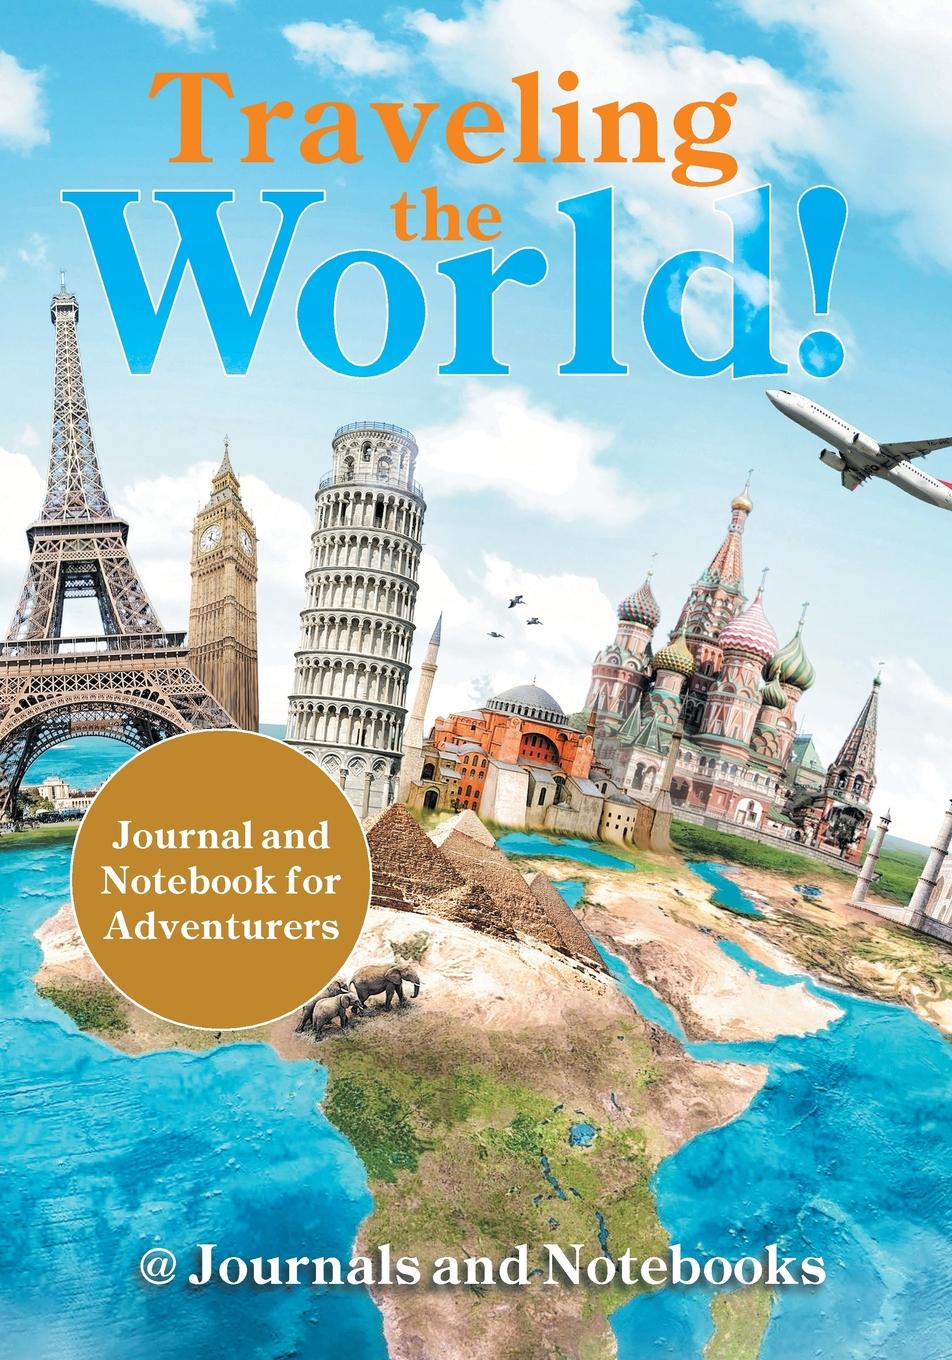 Book is about travelling. Книга путешествия. Travelling the World. World Travel. Путешествие с Педро.